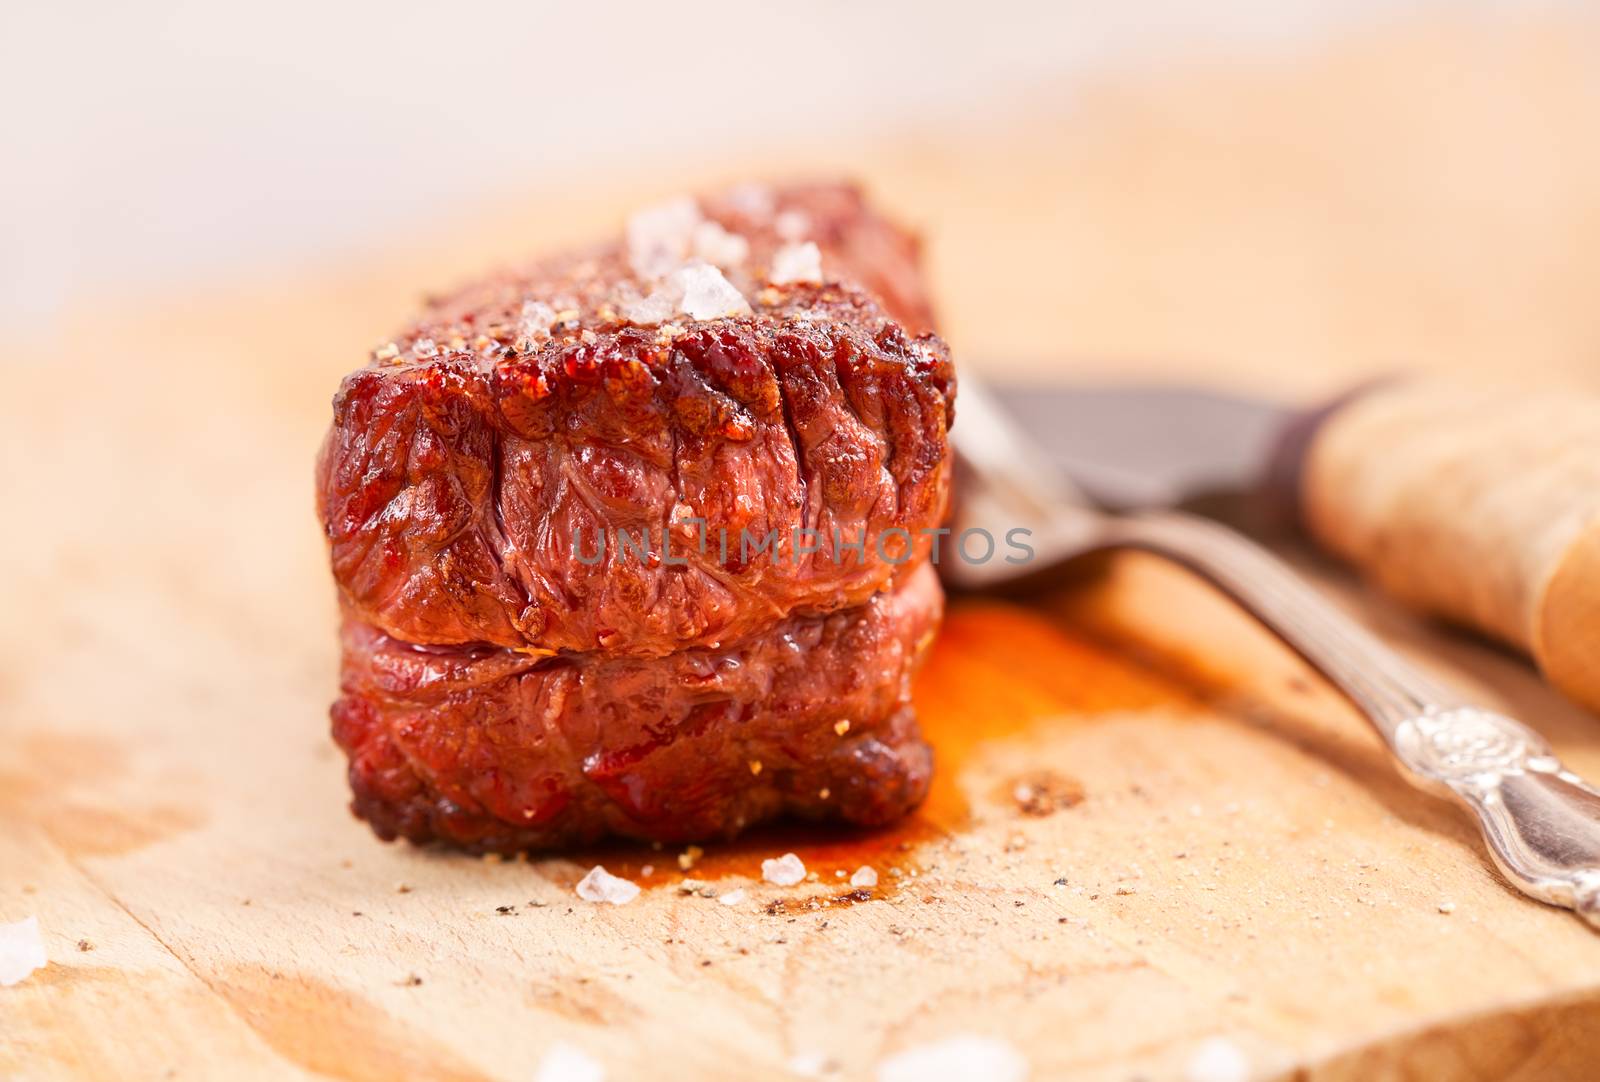 Grilled beef steak on a wooden table